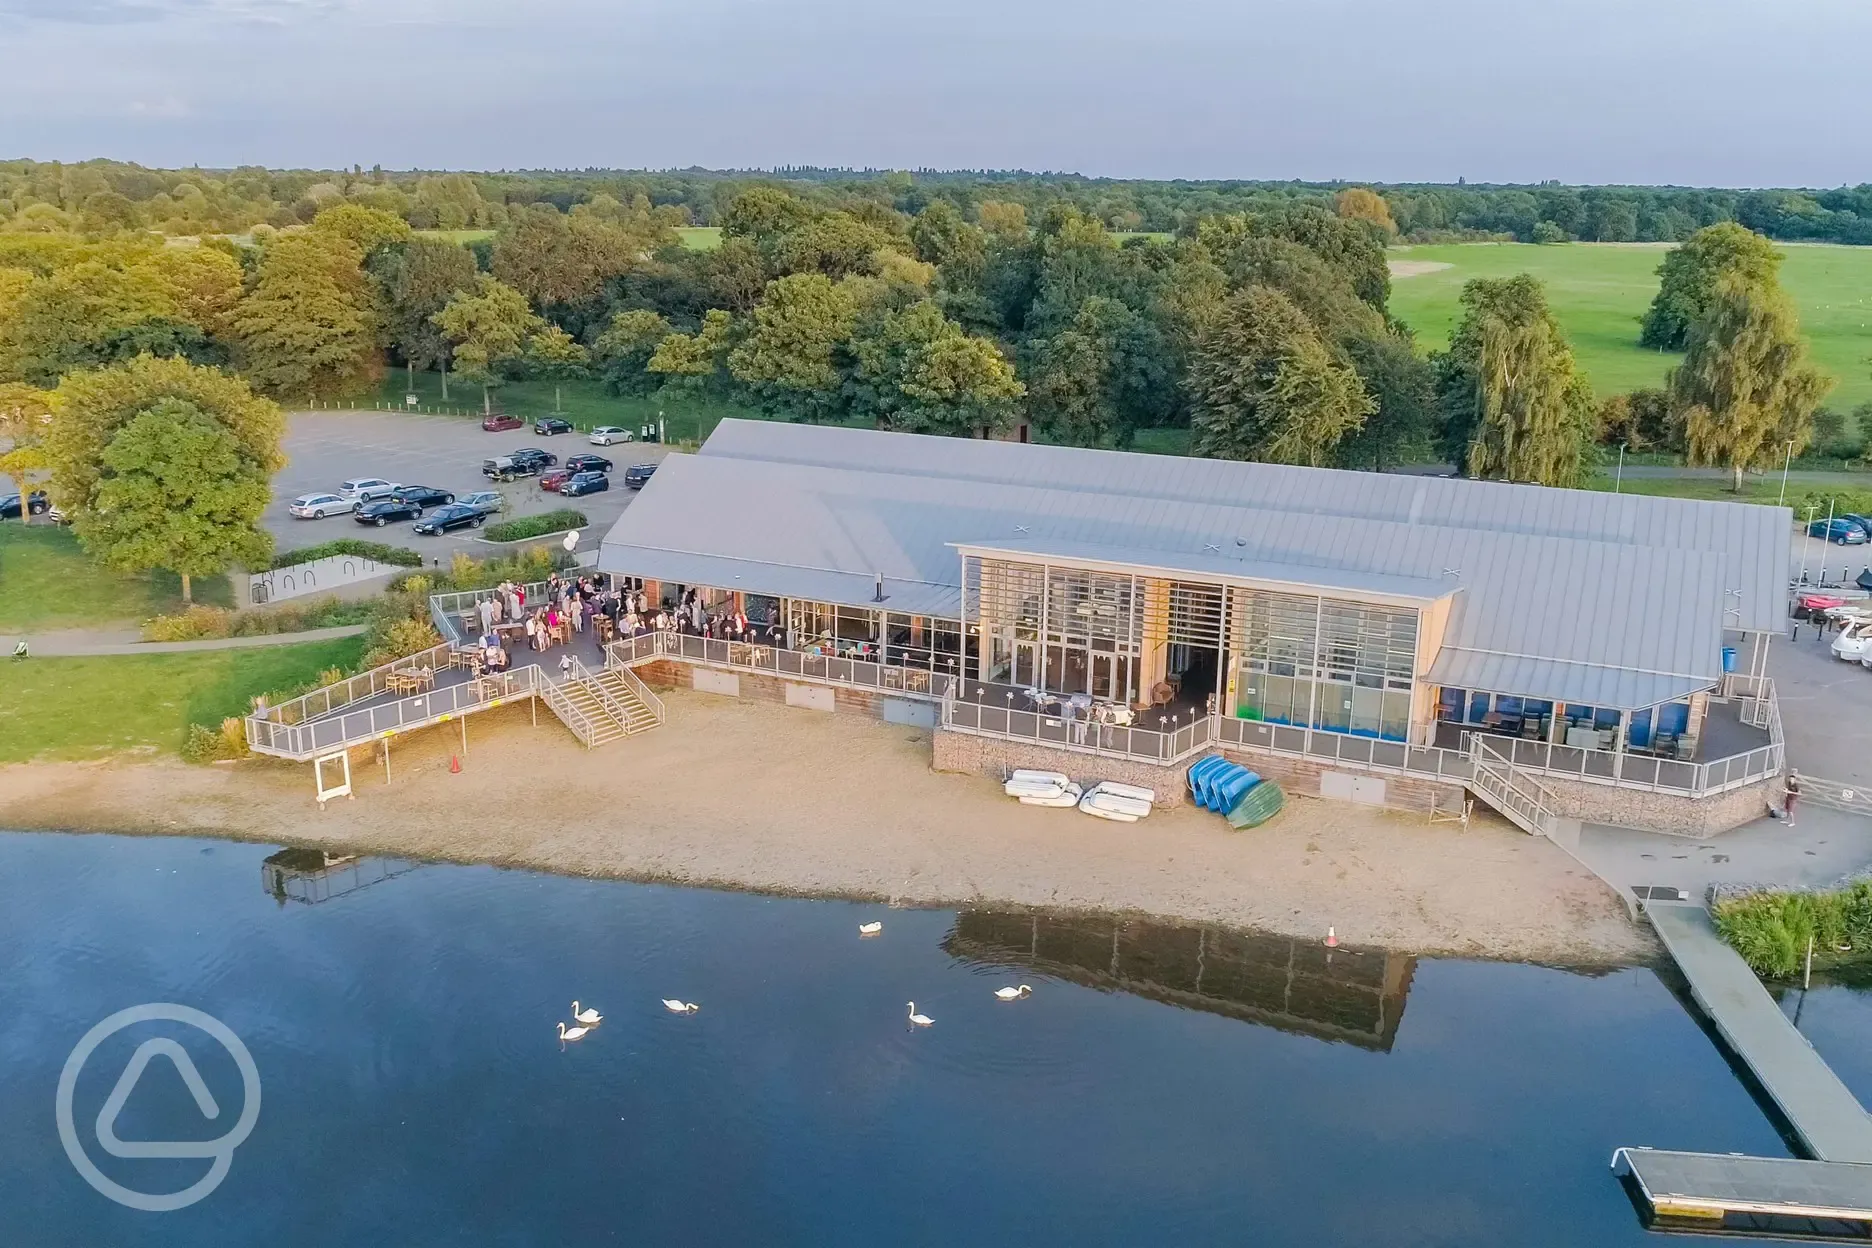 Nene Outdoors Watersports and Activity Centre